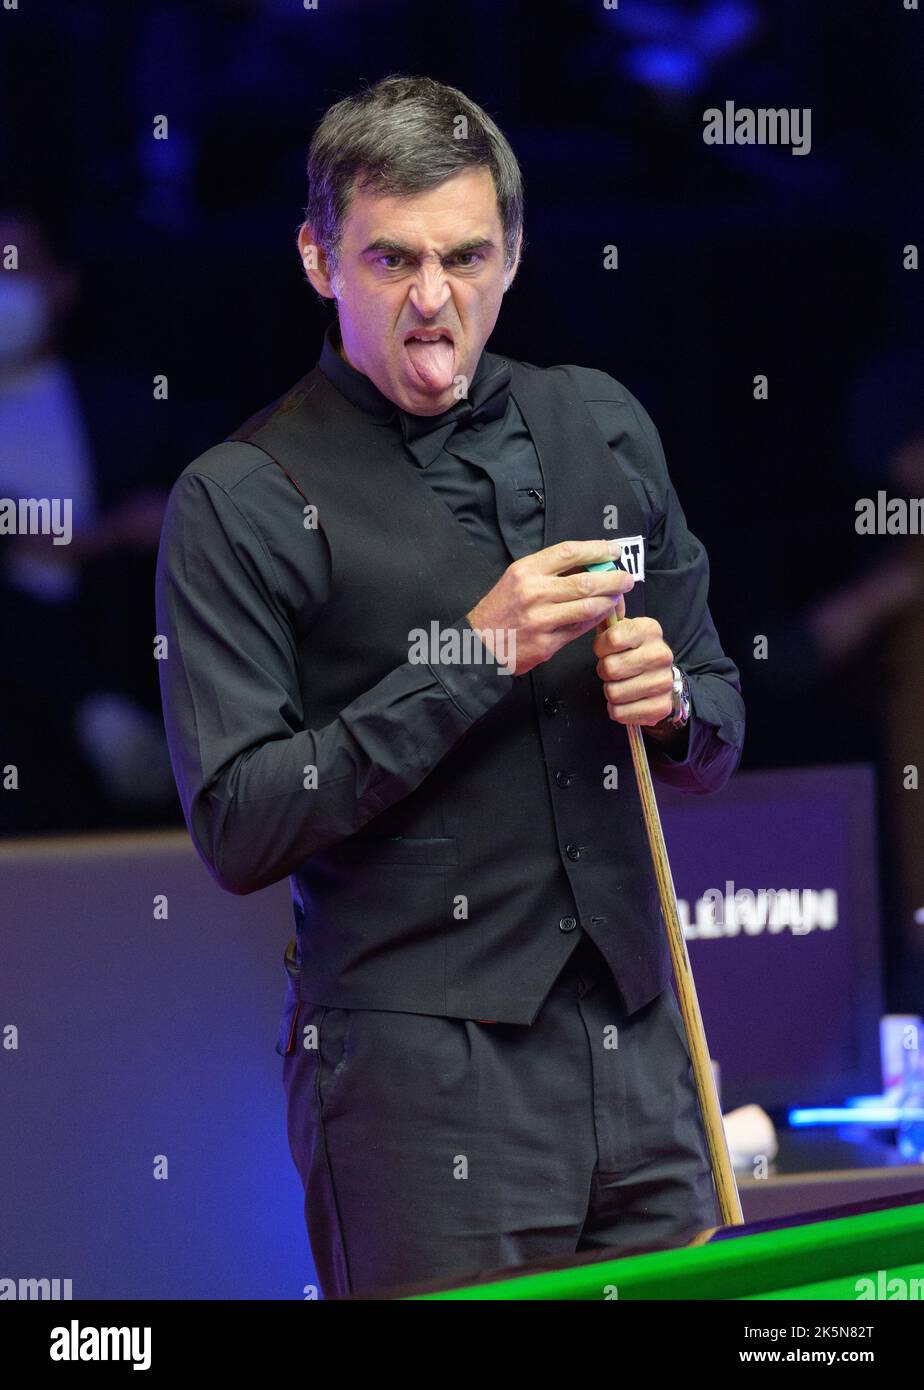 International snooker hi-res stock photography and images